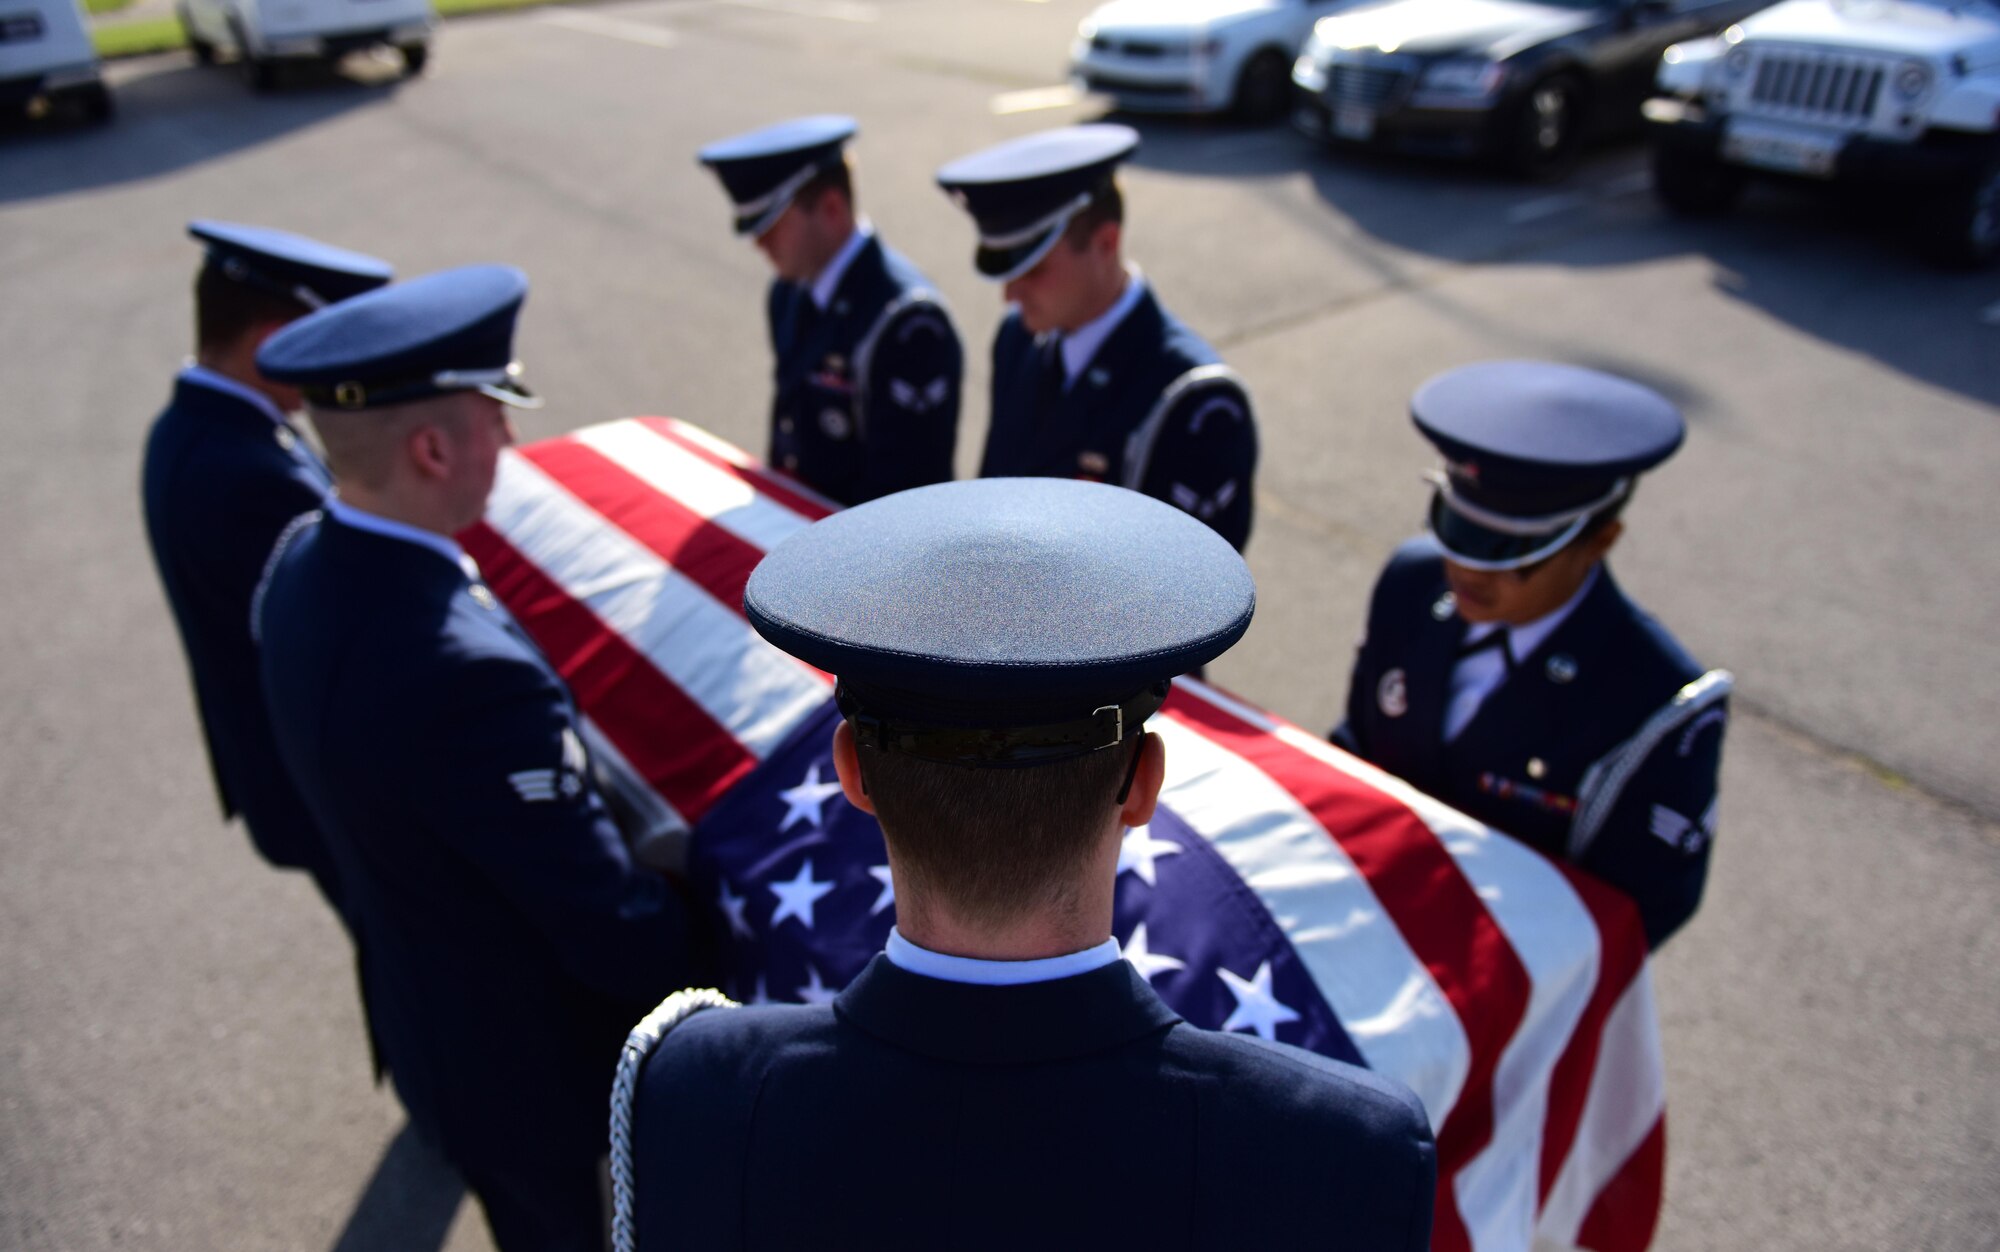 Members of the Whiteman Air Force Base Honor Guard practice a six-man funeral ceremony at Whiteman Air Force Base, Mo., Nov. 2, 2016. The Whiteman Honor Guard performs a wide array of ceremonies from color guard details to saber teams for weddings, however, the primary mission of the Whiteman Honor Guard is to provide funeral honors for veterans, retirees and active-duty members. (U.S. Air Force photo by Senior Airman Joel Pfiester)